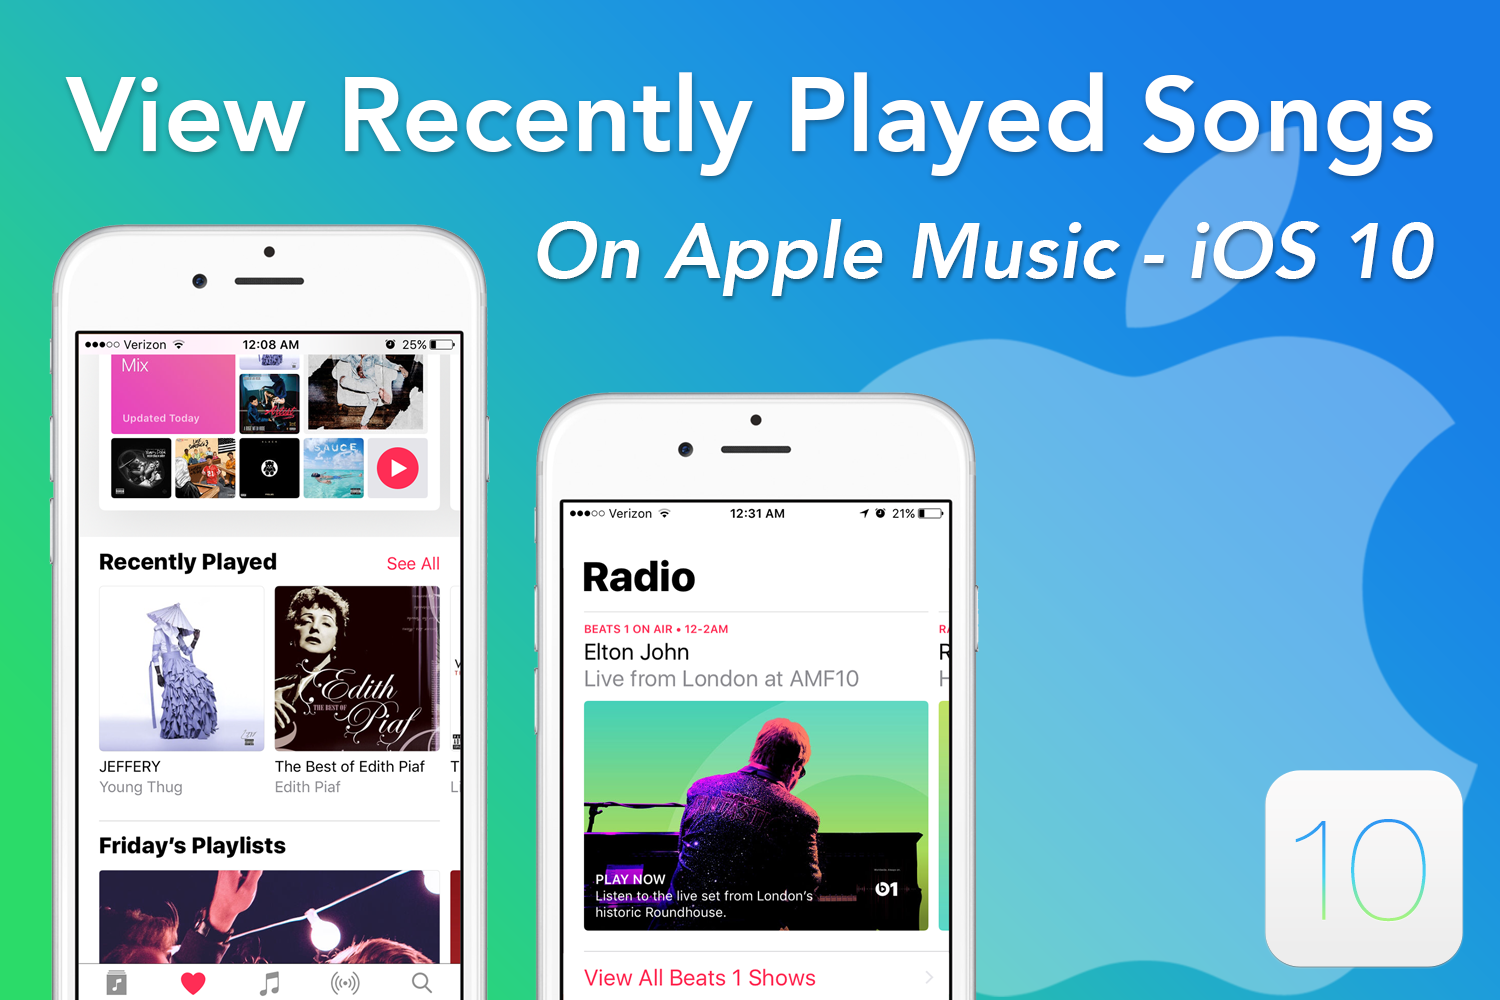 Guide: How To View Recently Played Songs on iOS 10